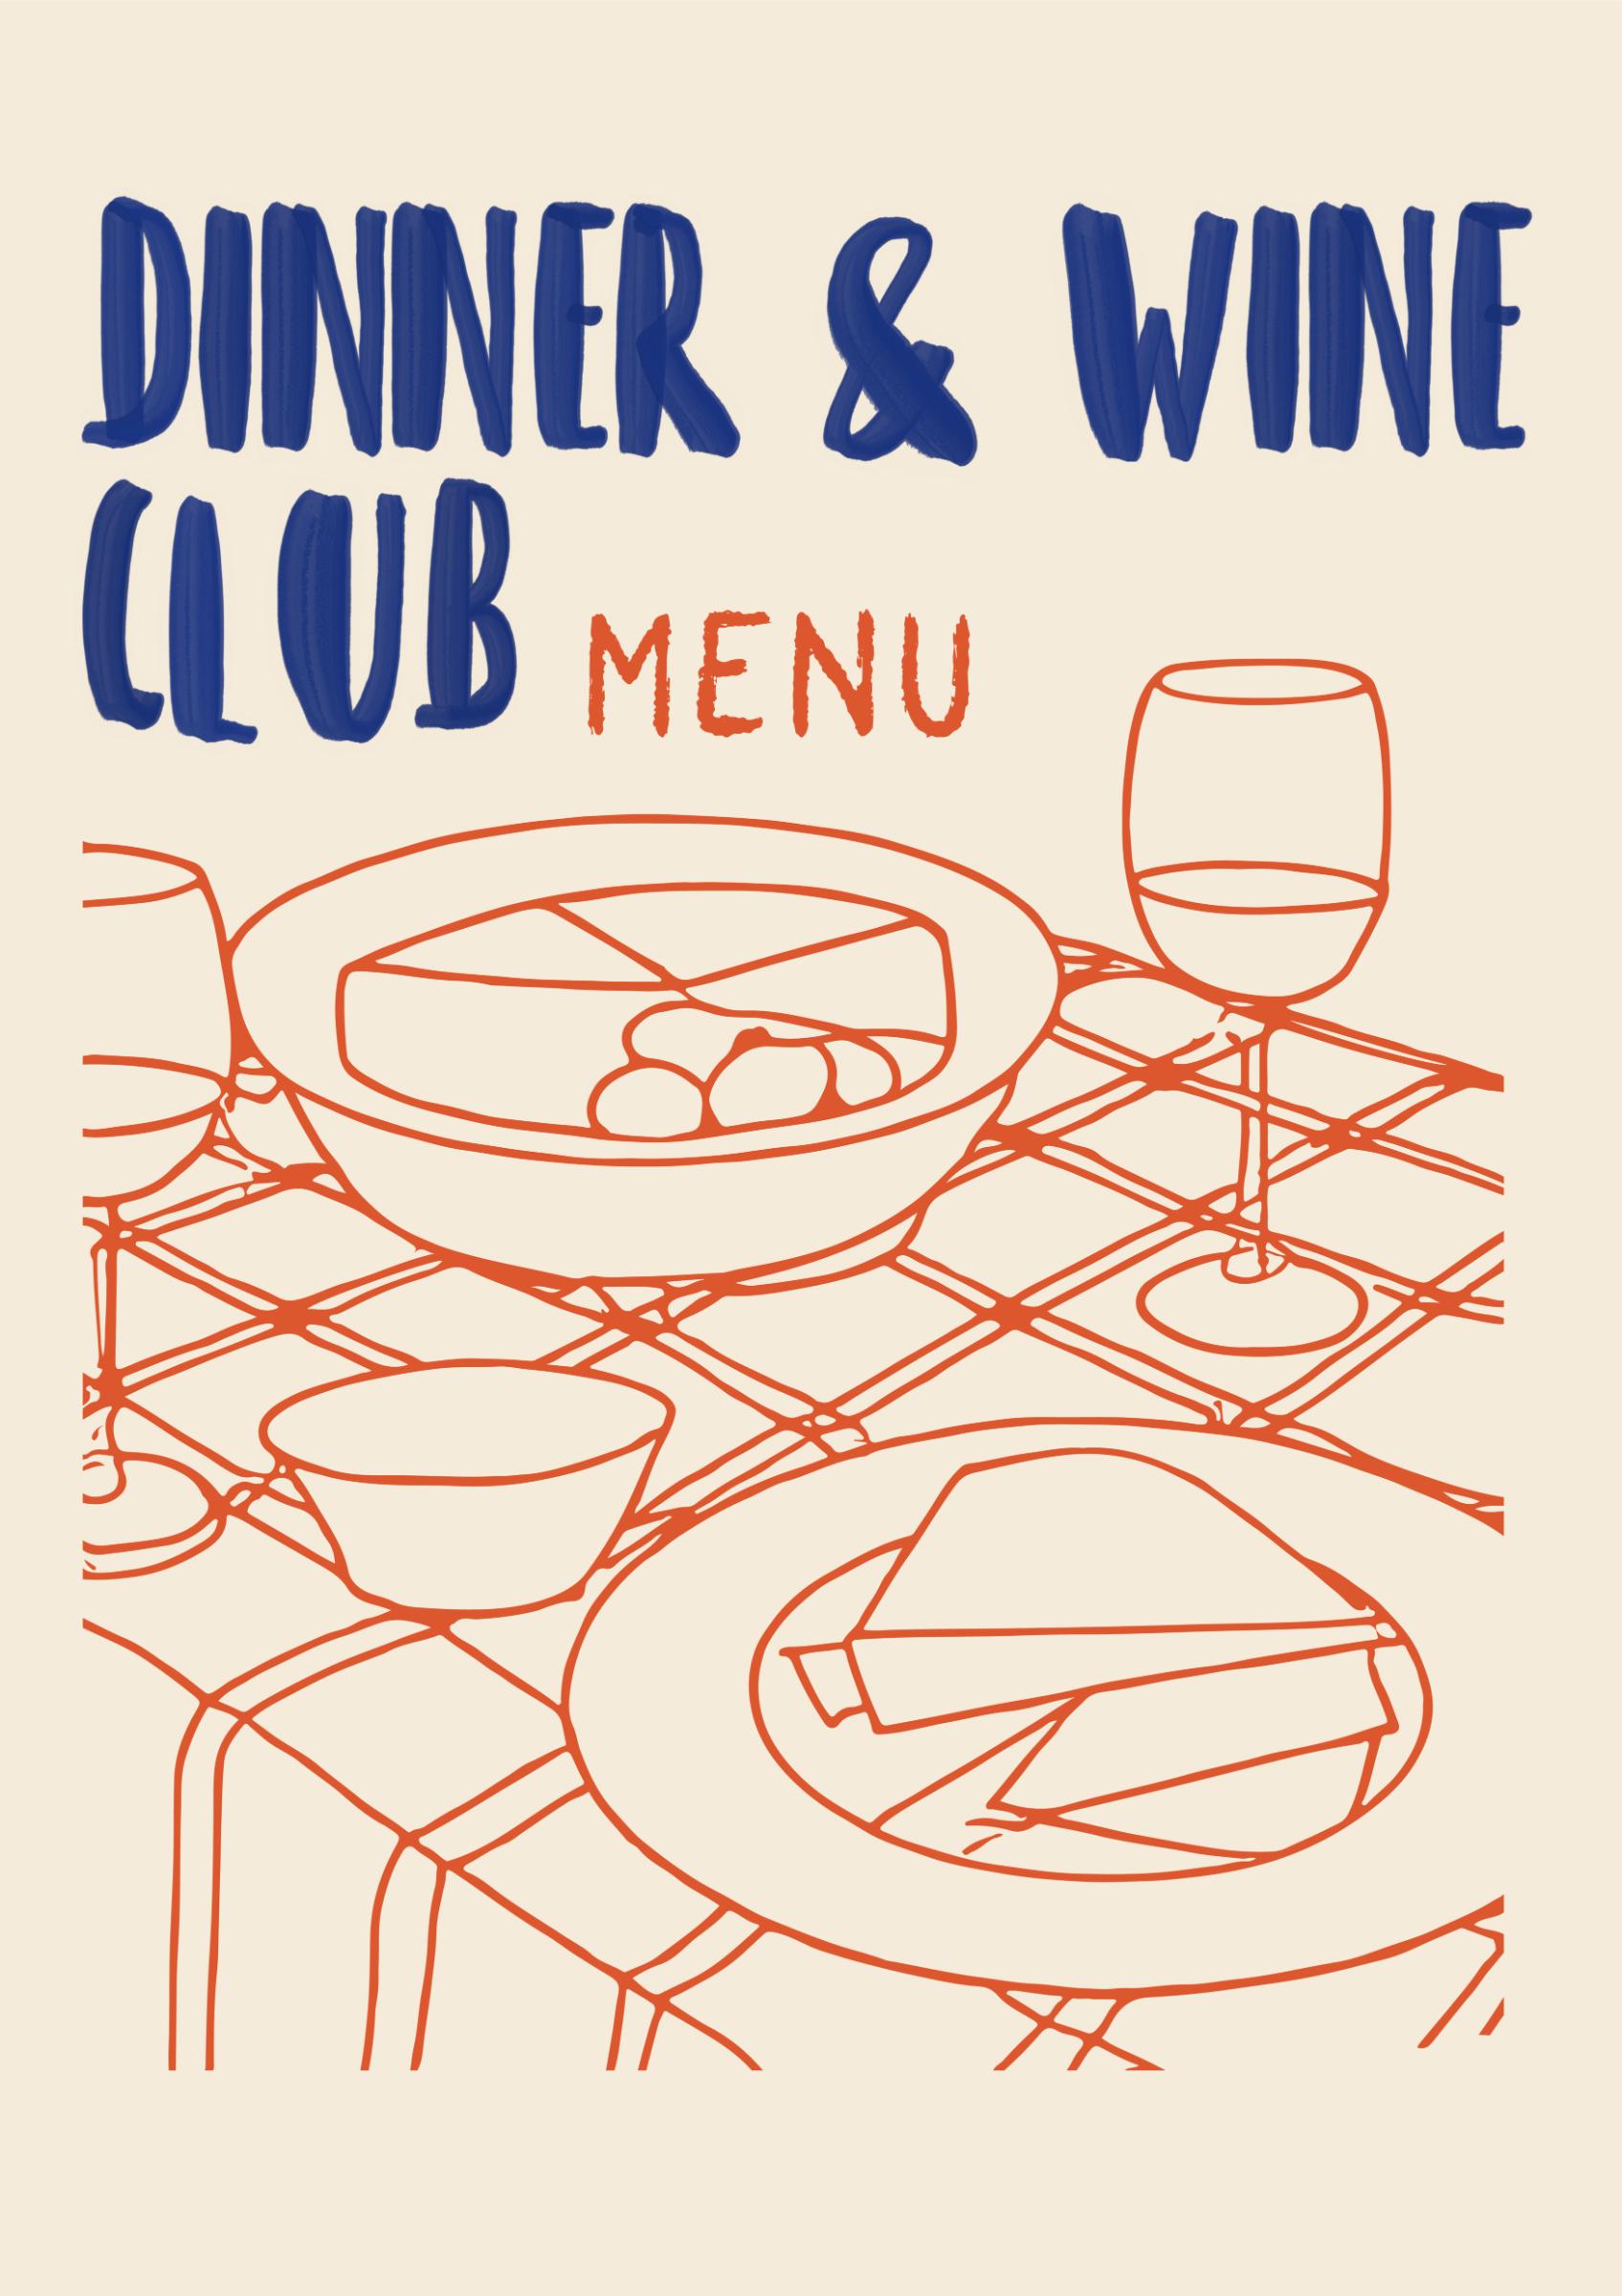 a menu for a dinner and wine club